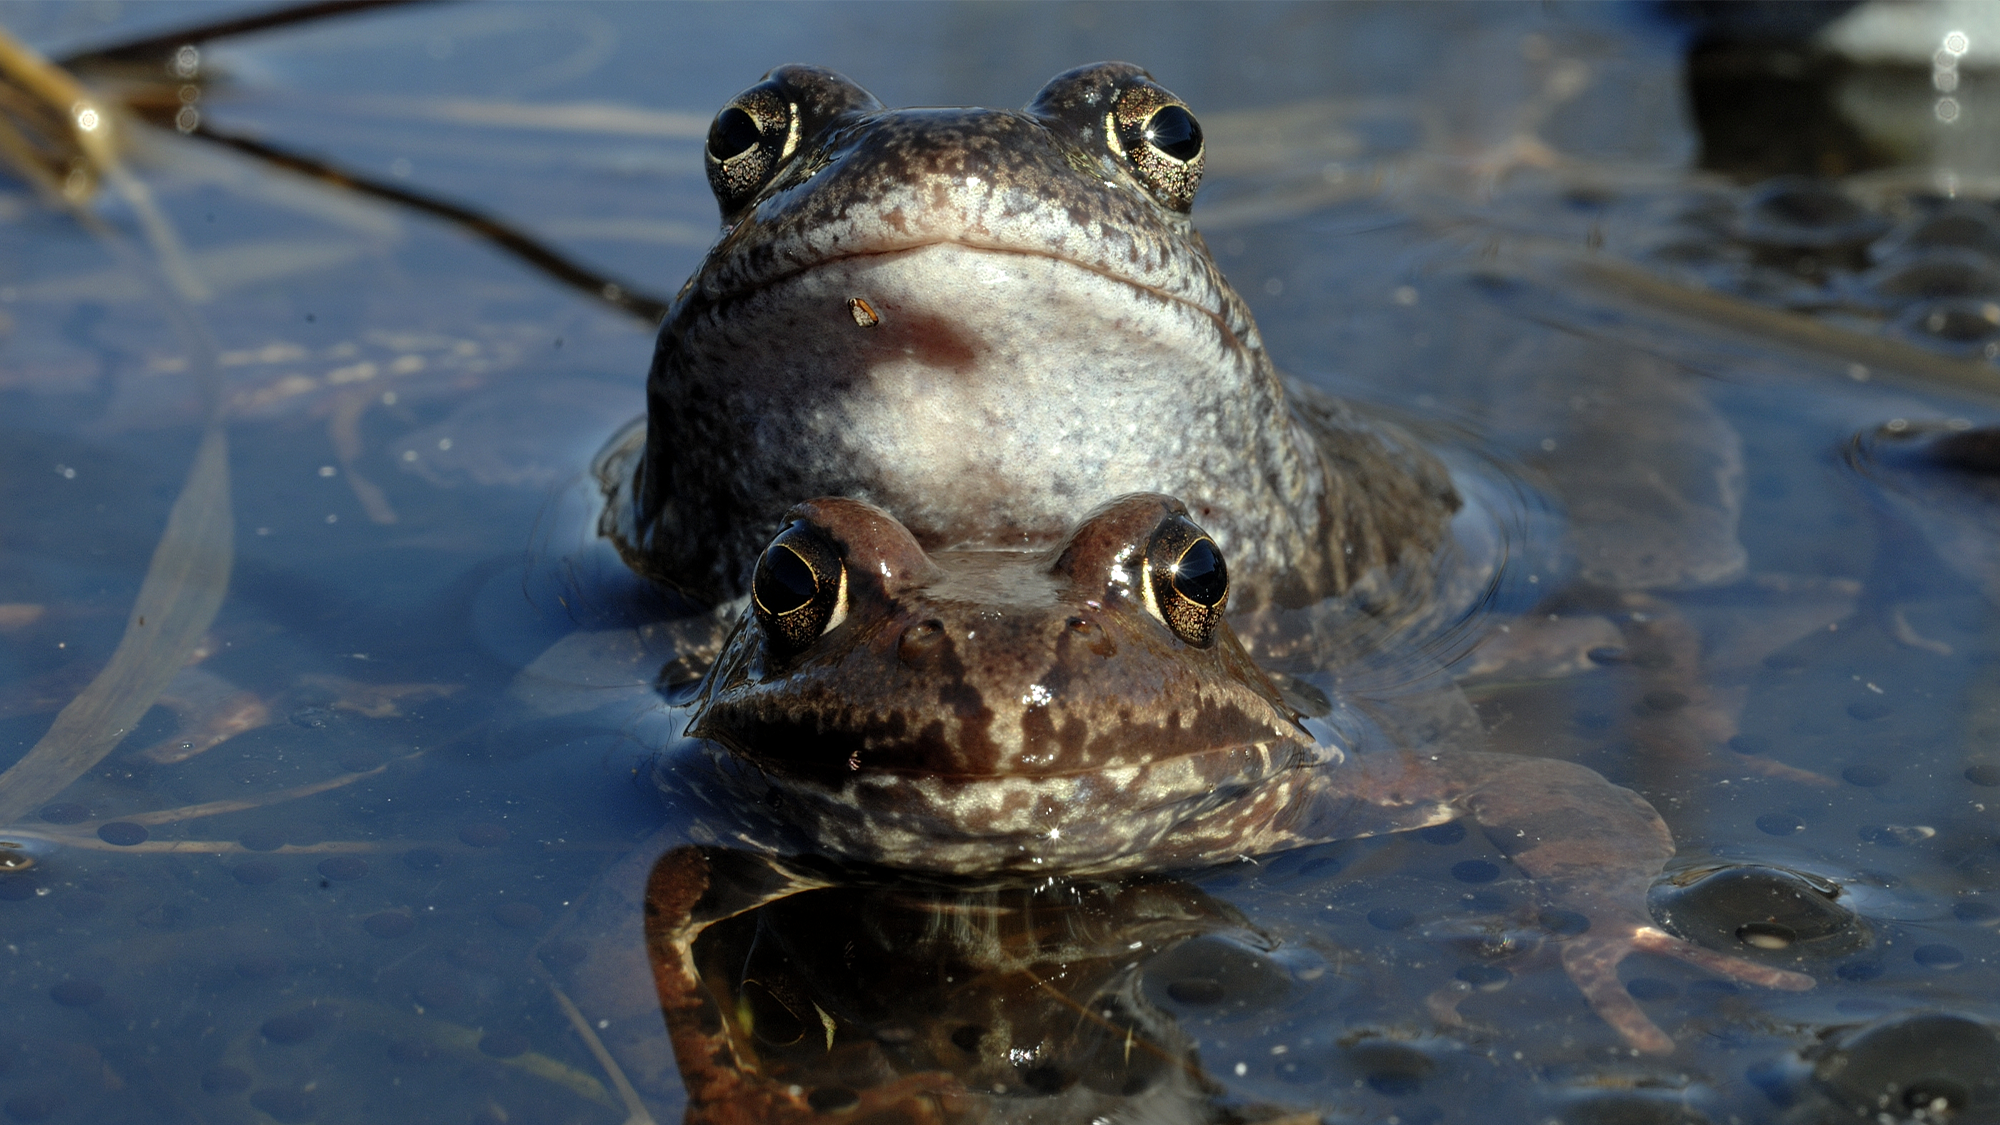 Female frogs appear to play dead to avoid unwanted mates